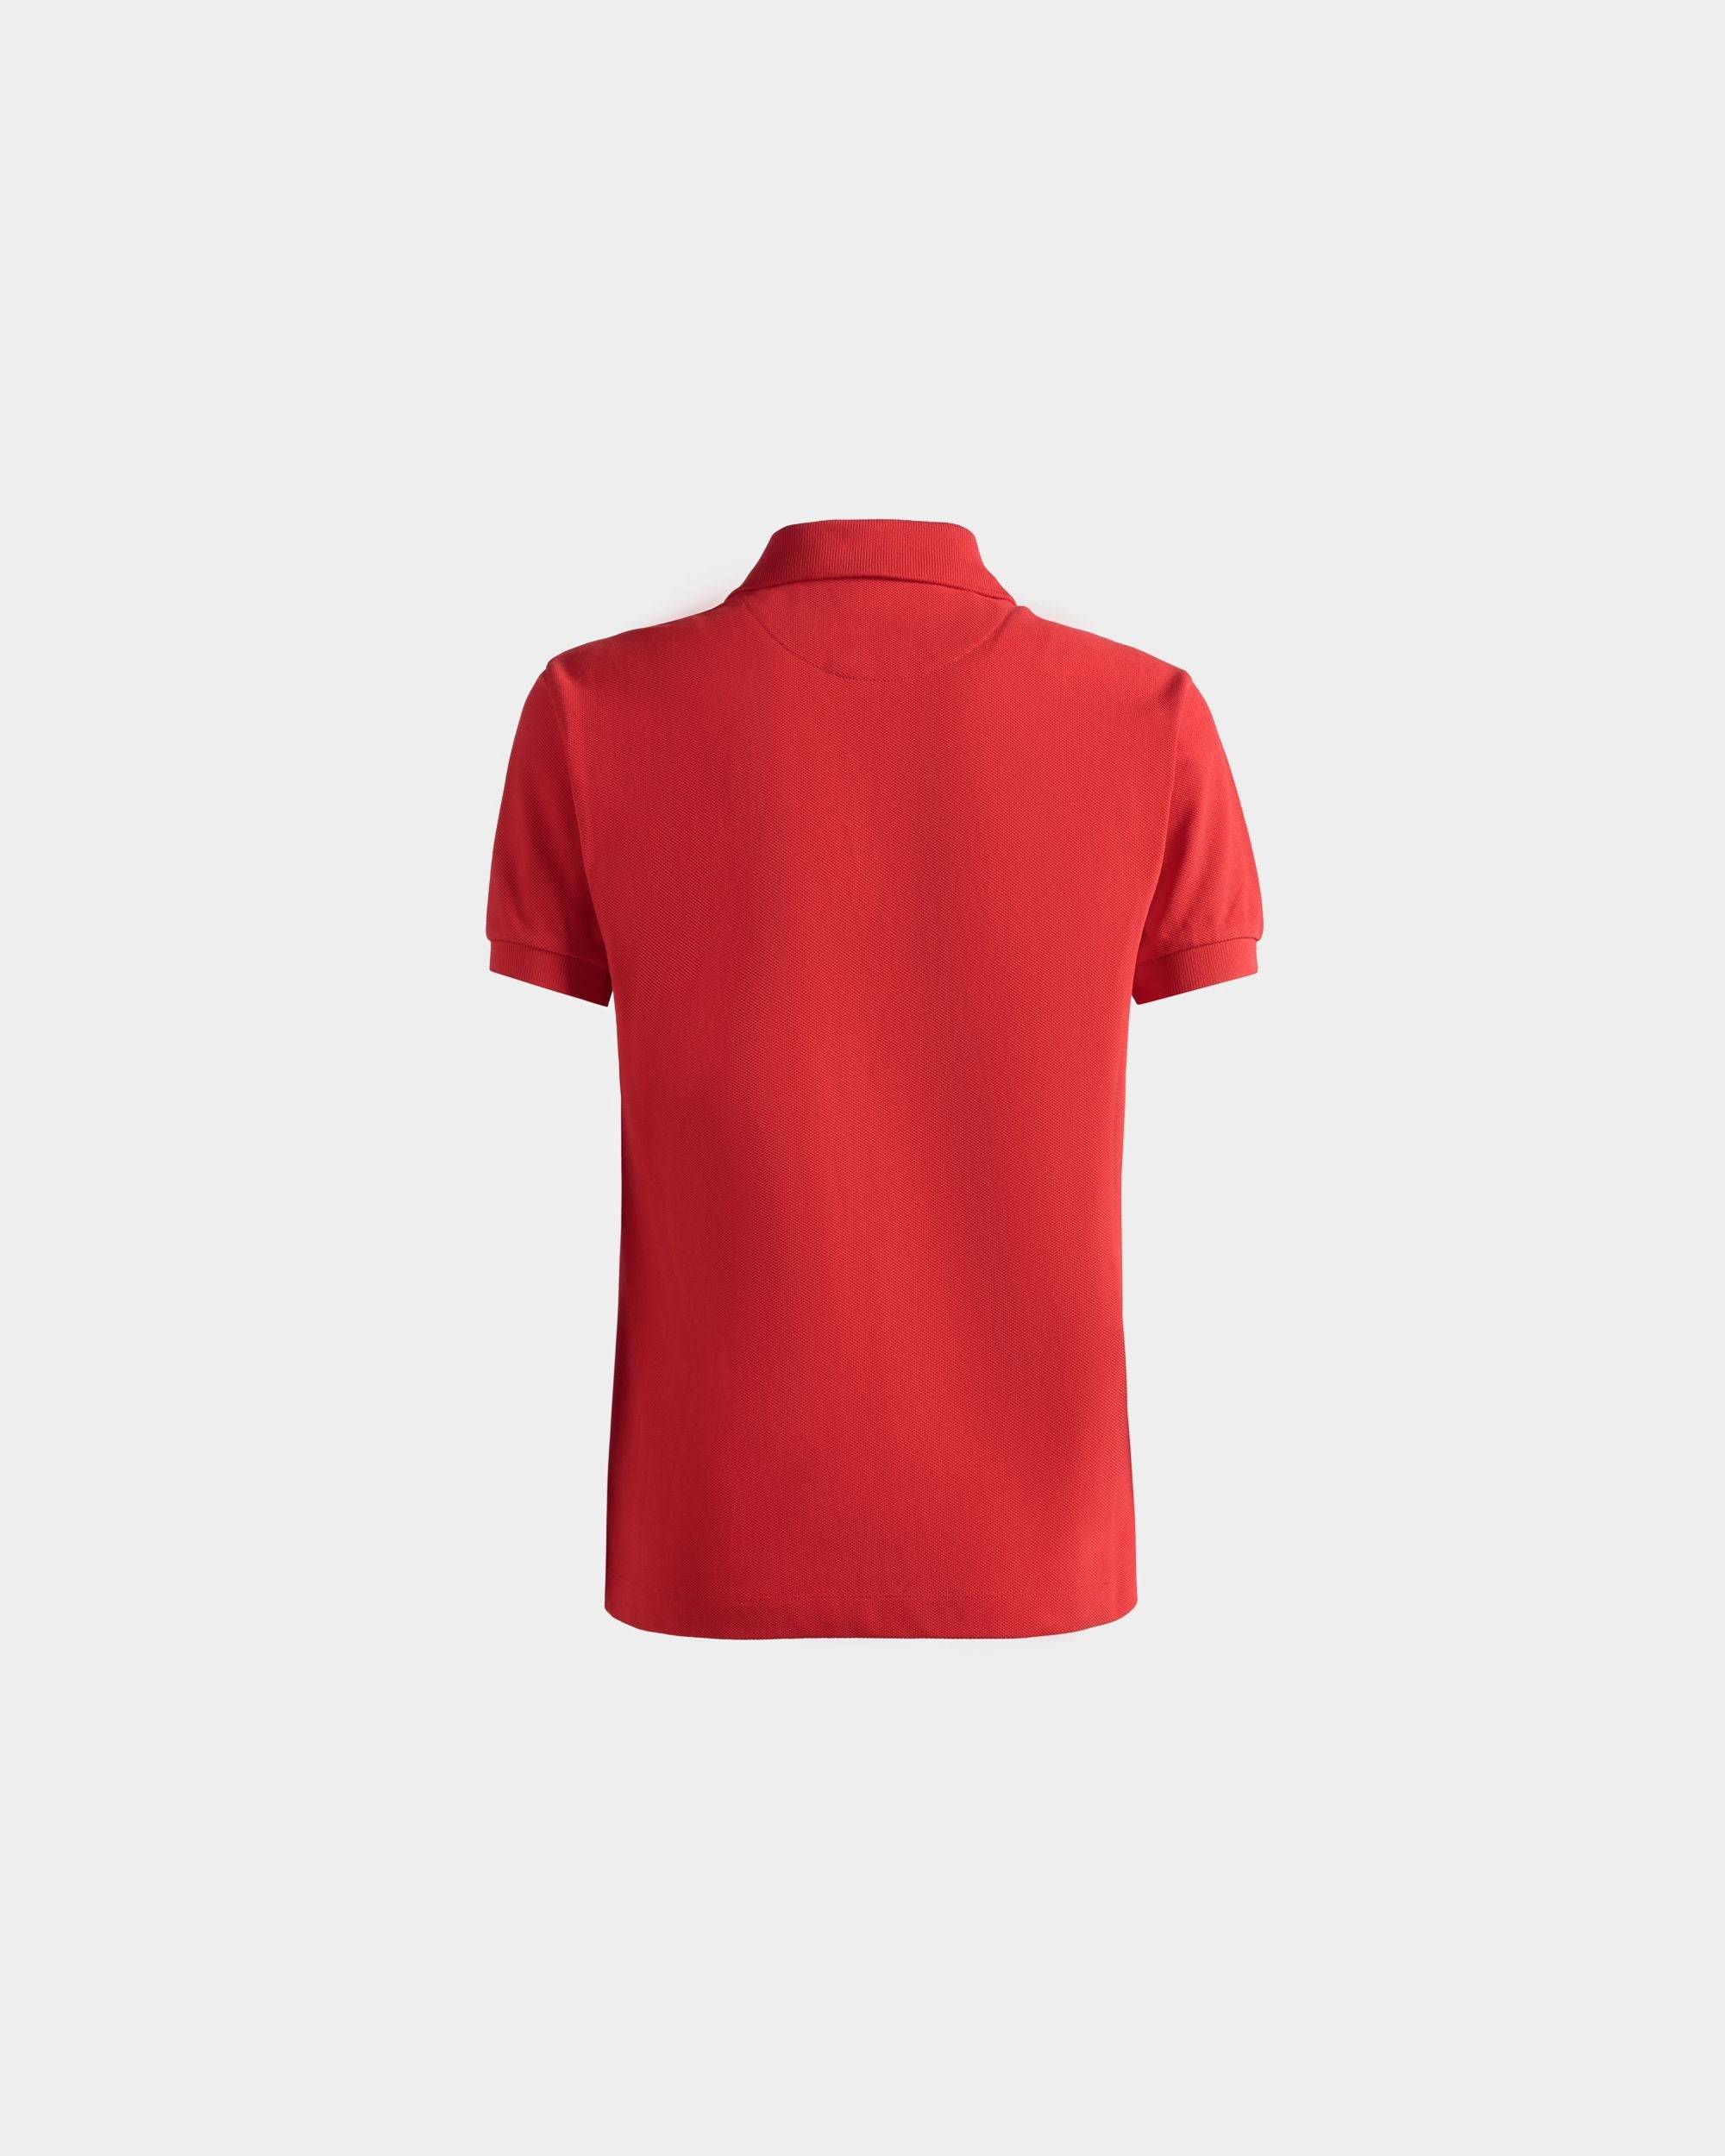 Women's Short Sleeve Polo in Red Cotton | Bally | Still Life Back